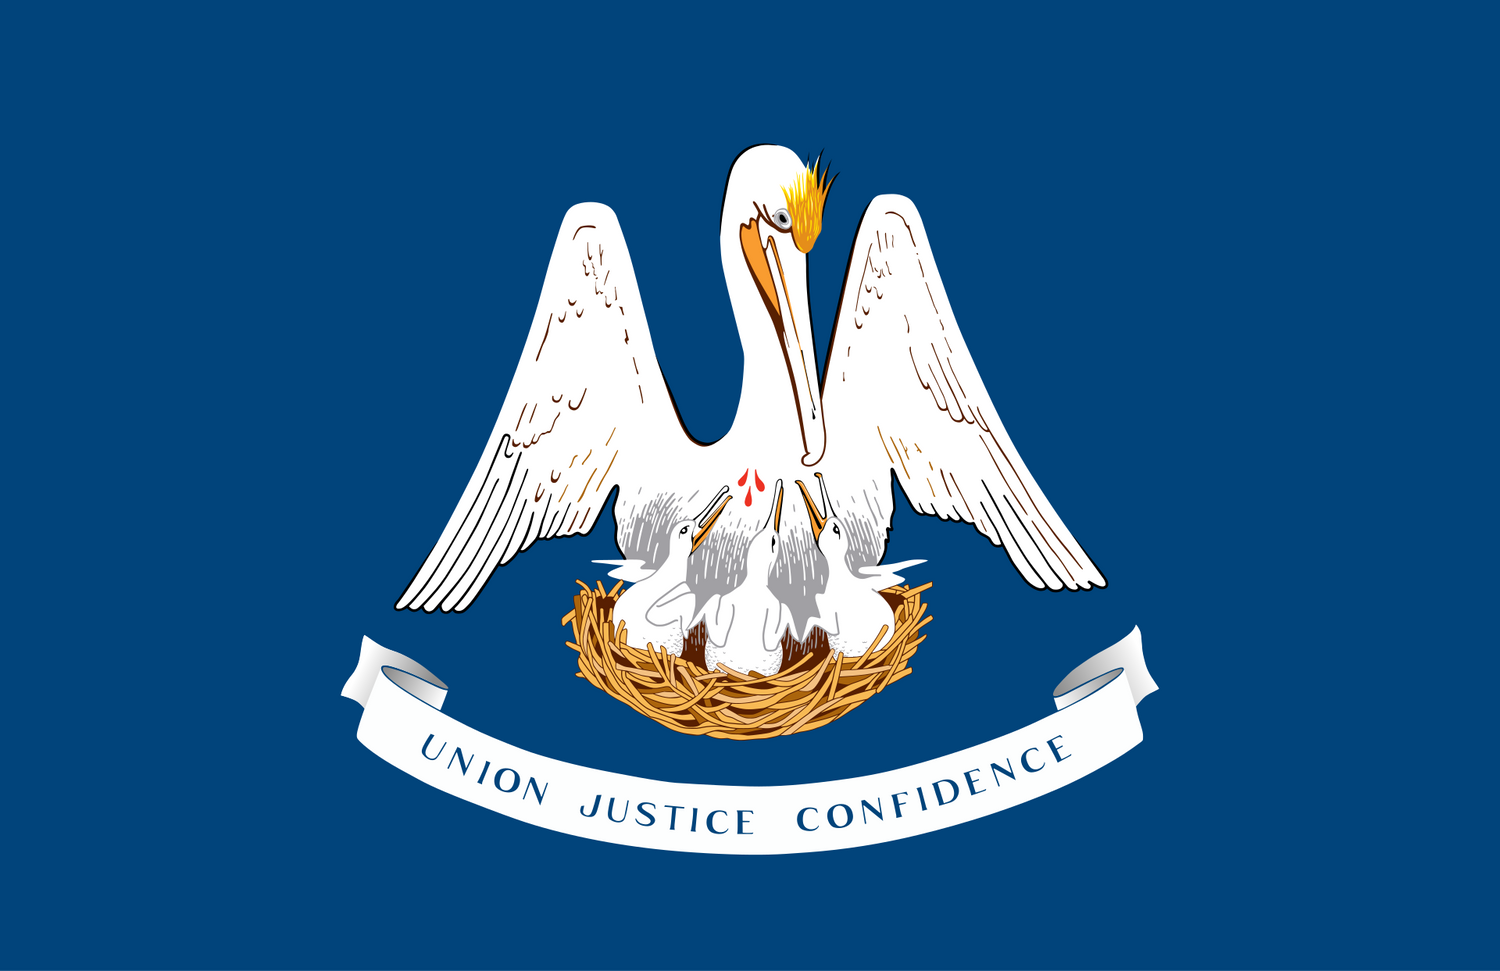 The official state flag of Louisiana was adopted in 1912 and features a pelican in white in the center of a blue field. - History By Mail